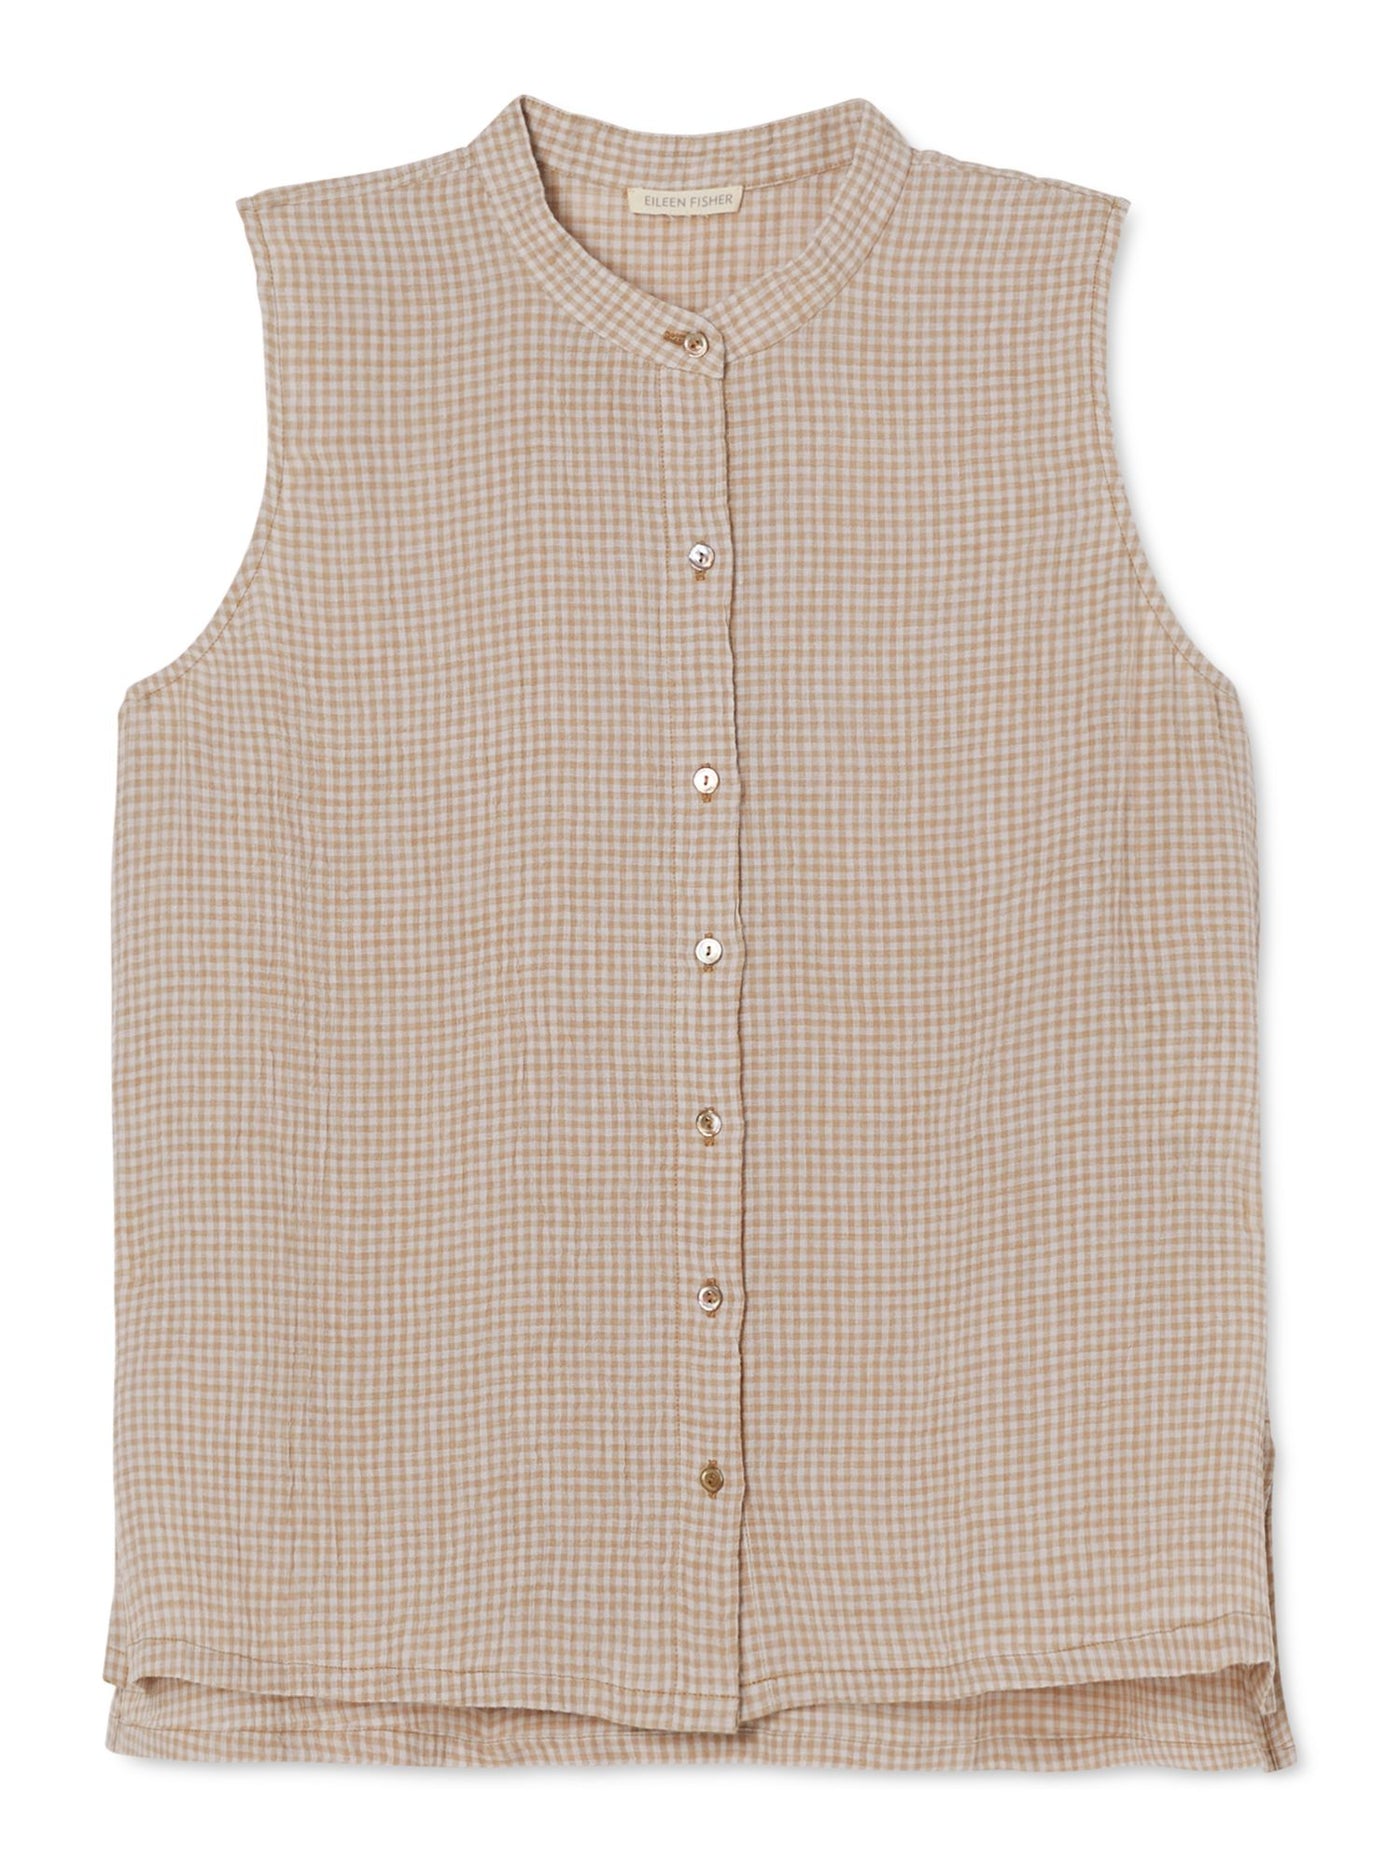 EILEEN FISHER Womens Beige Unlined Vented Hem Check Sleeveless Button Up Top S\P